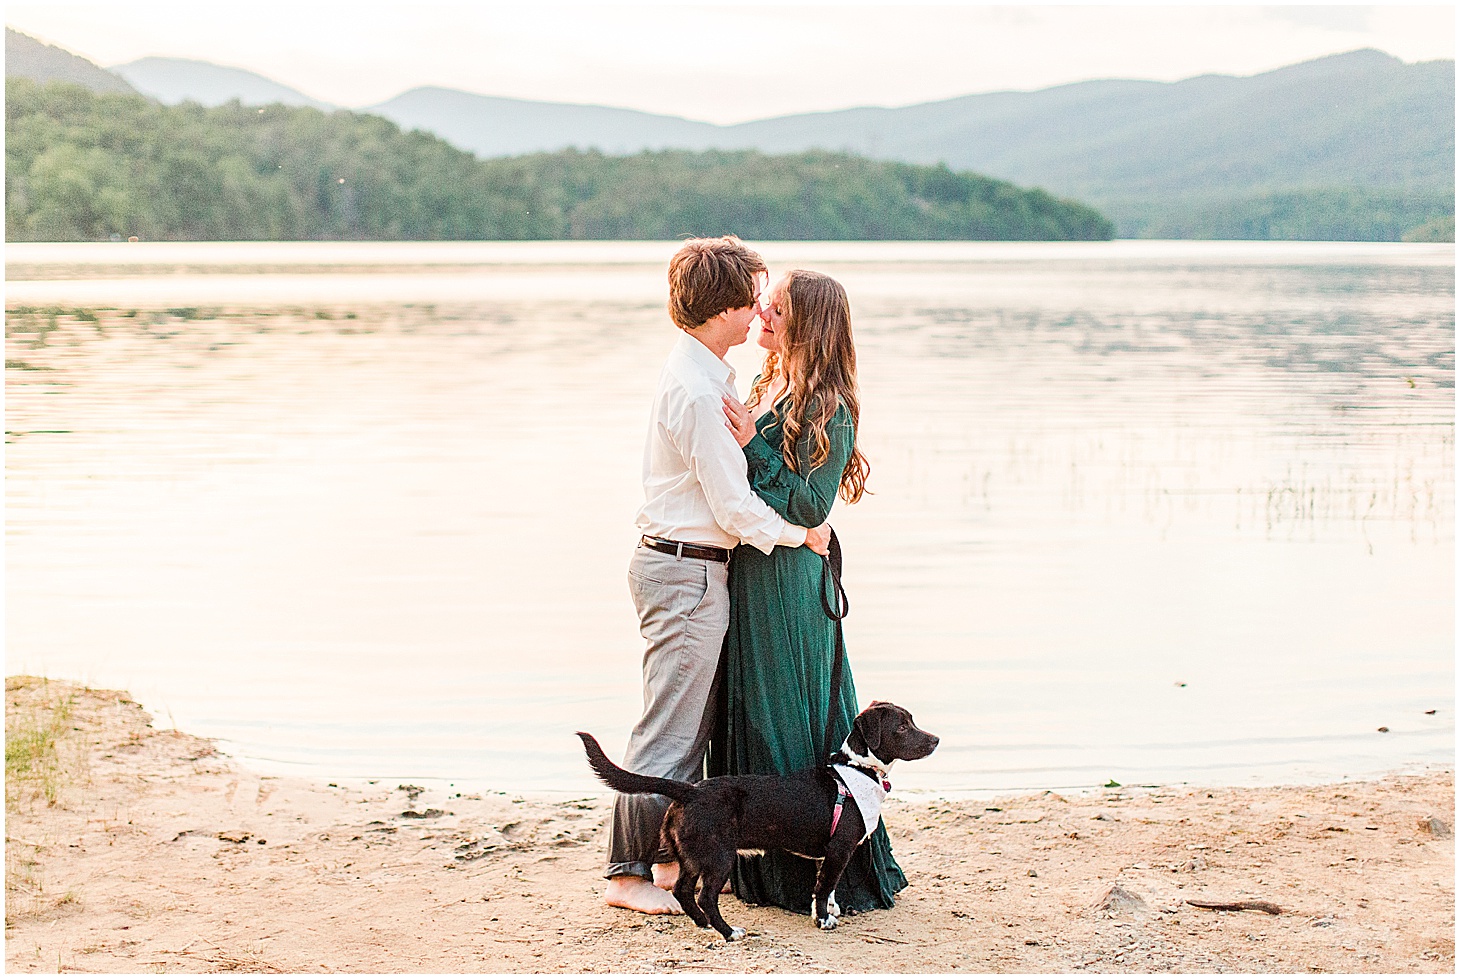 carvinscoveengagementsession_roanokeengagementsession_carvinscove_virginiawedding_virginiaweddingphotographer_vaweddingphotographer_photo_0081.jpg